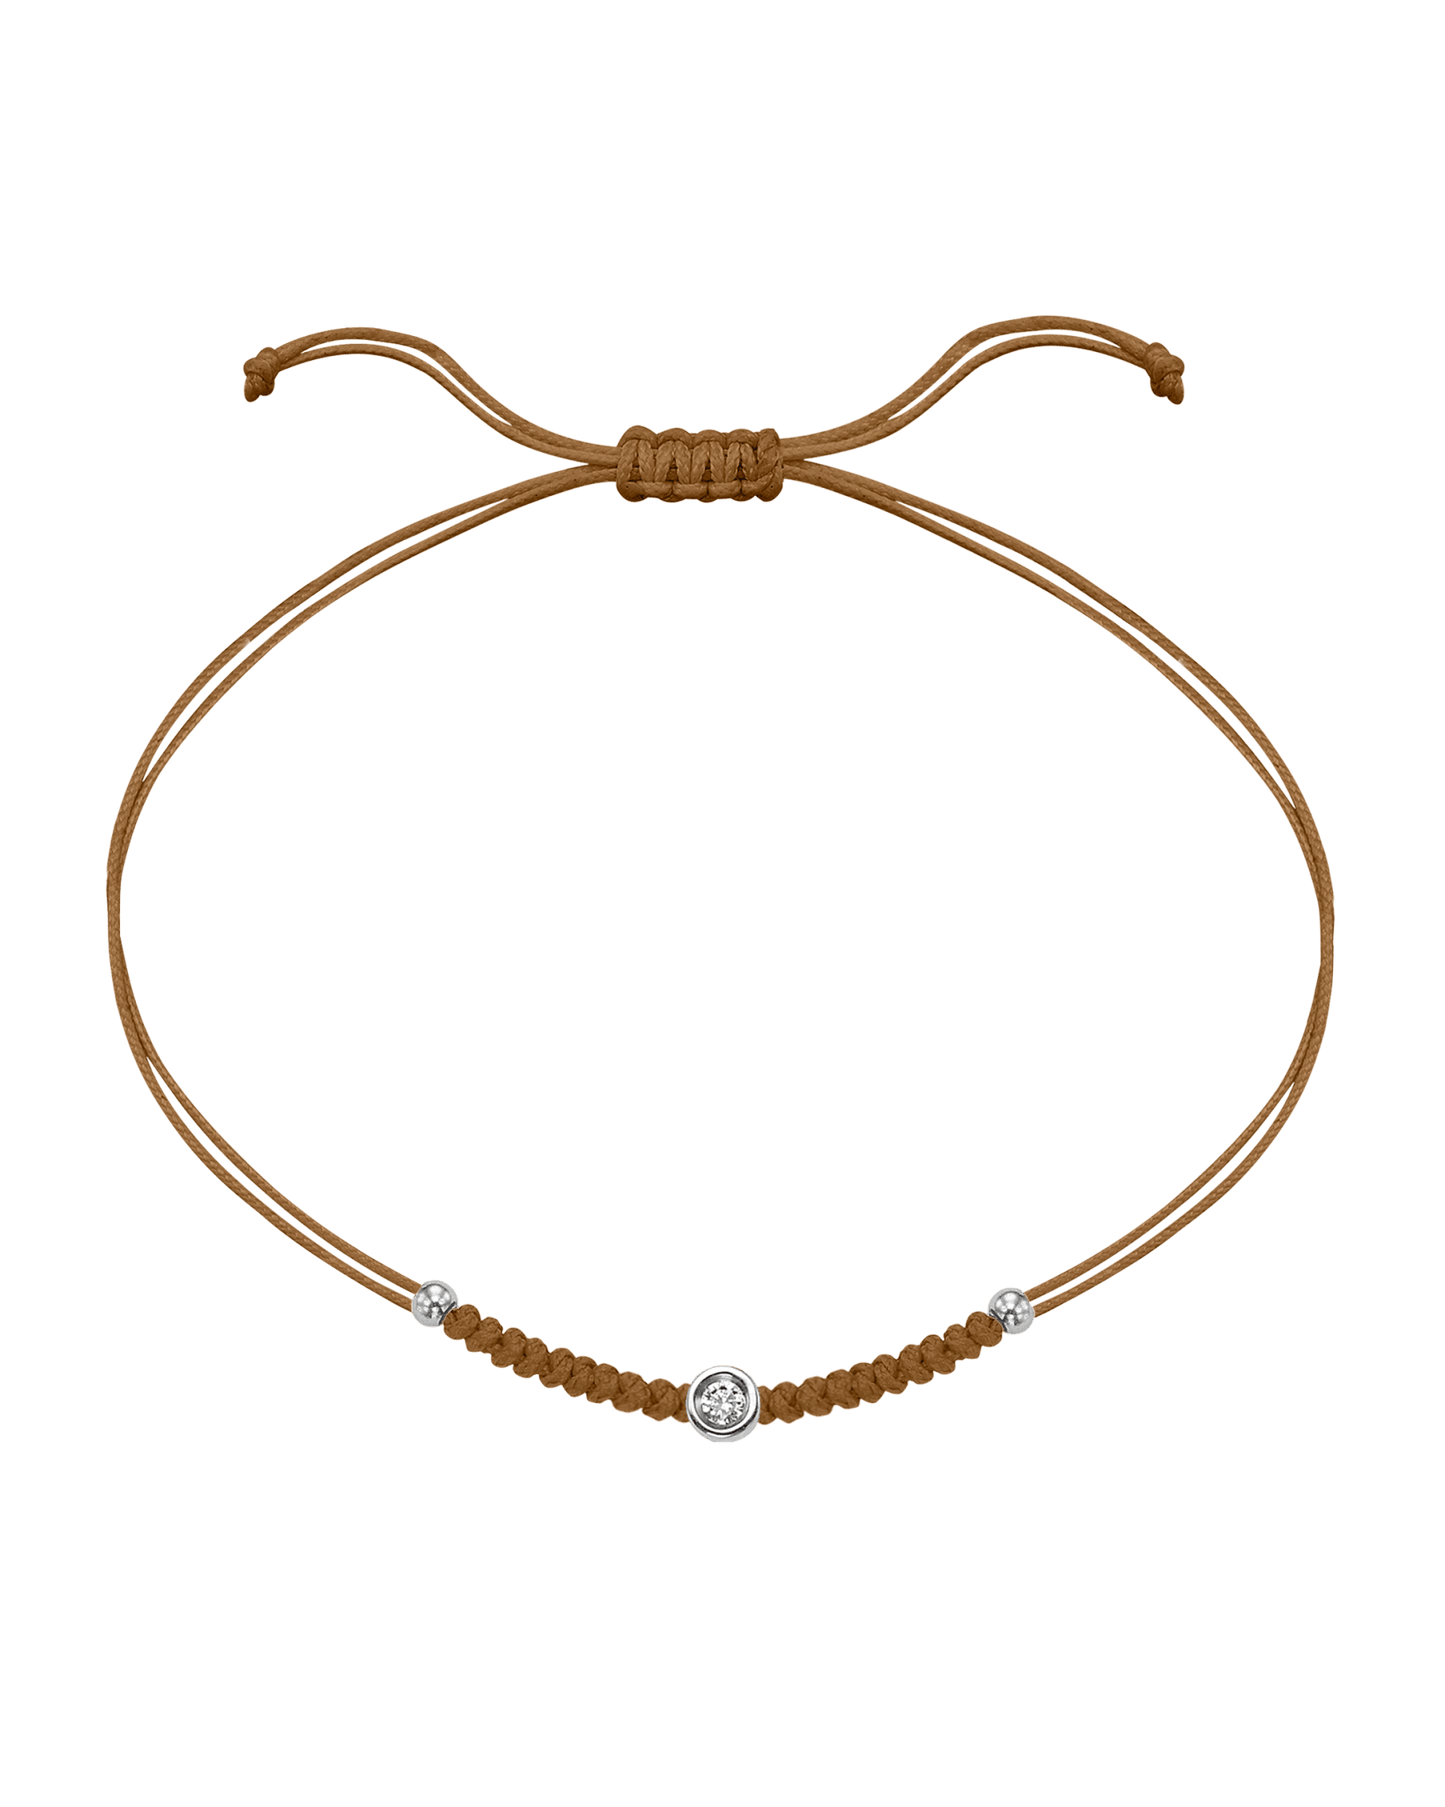 Solid Gold Sphere String of Love - 14K White Gold Bracelet 14K Solid Gold Camel Small: 0.03ct 